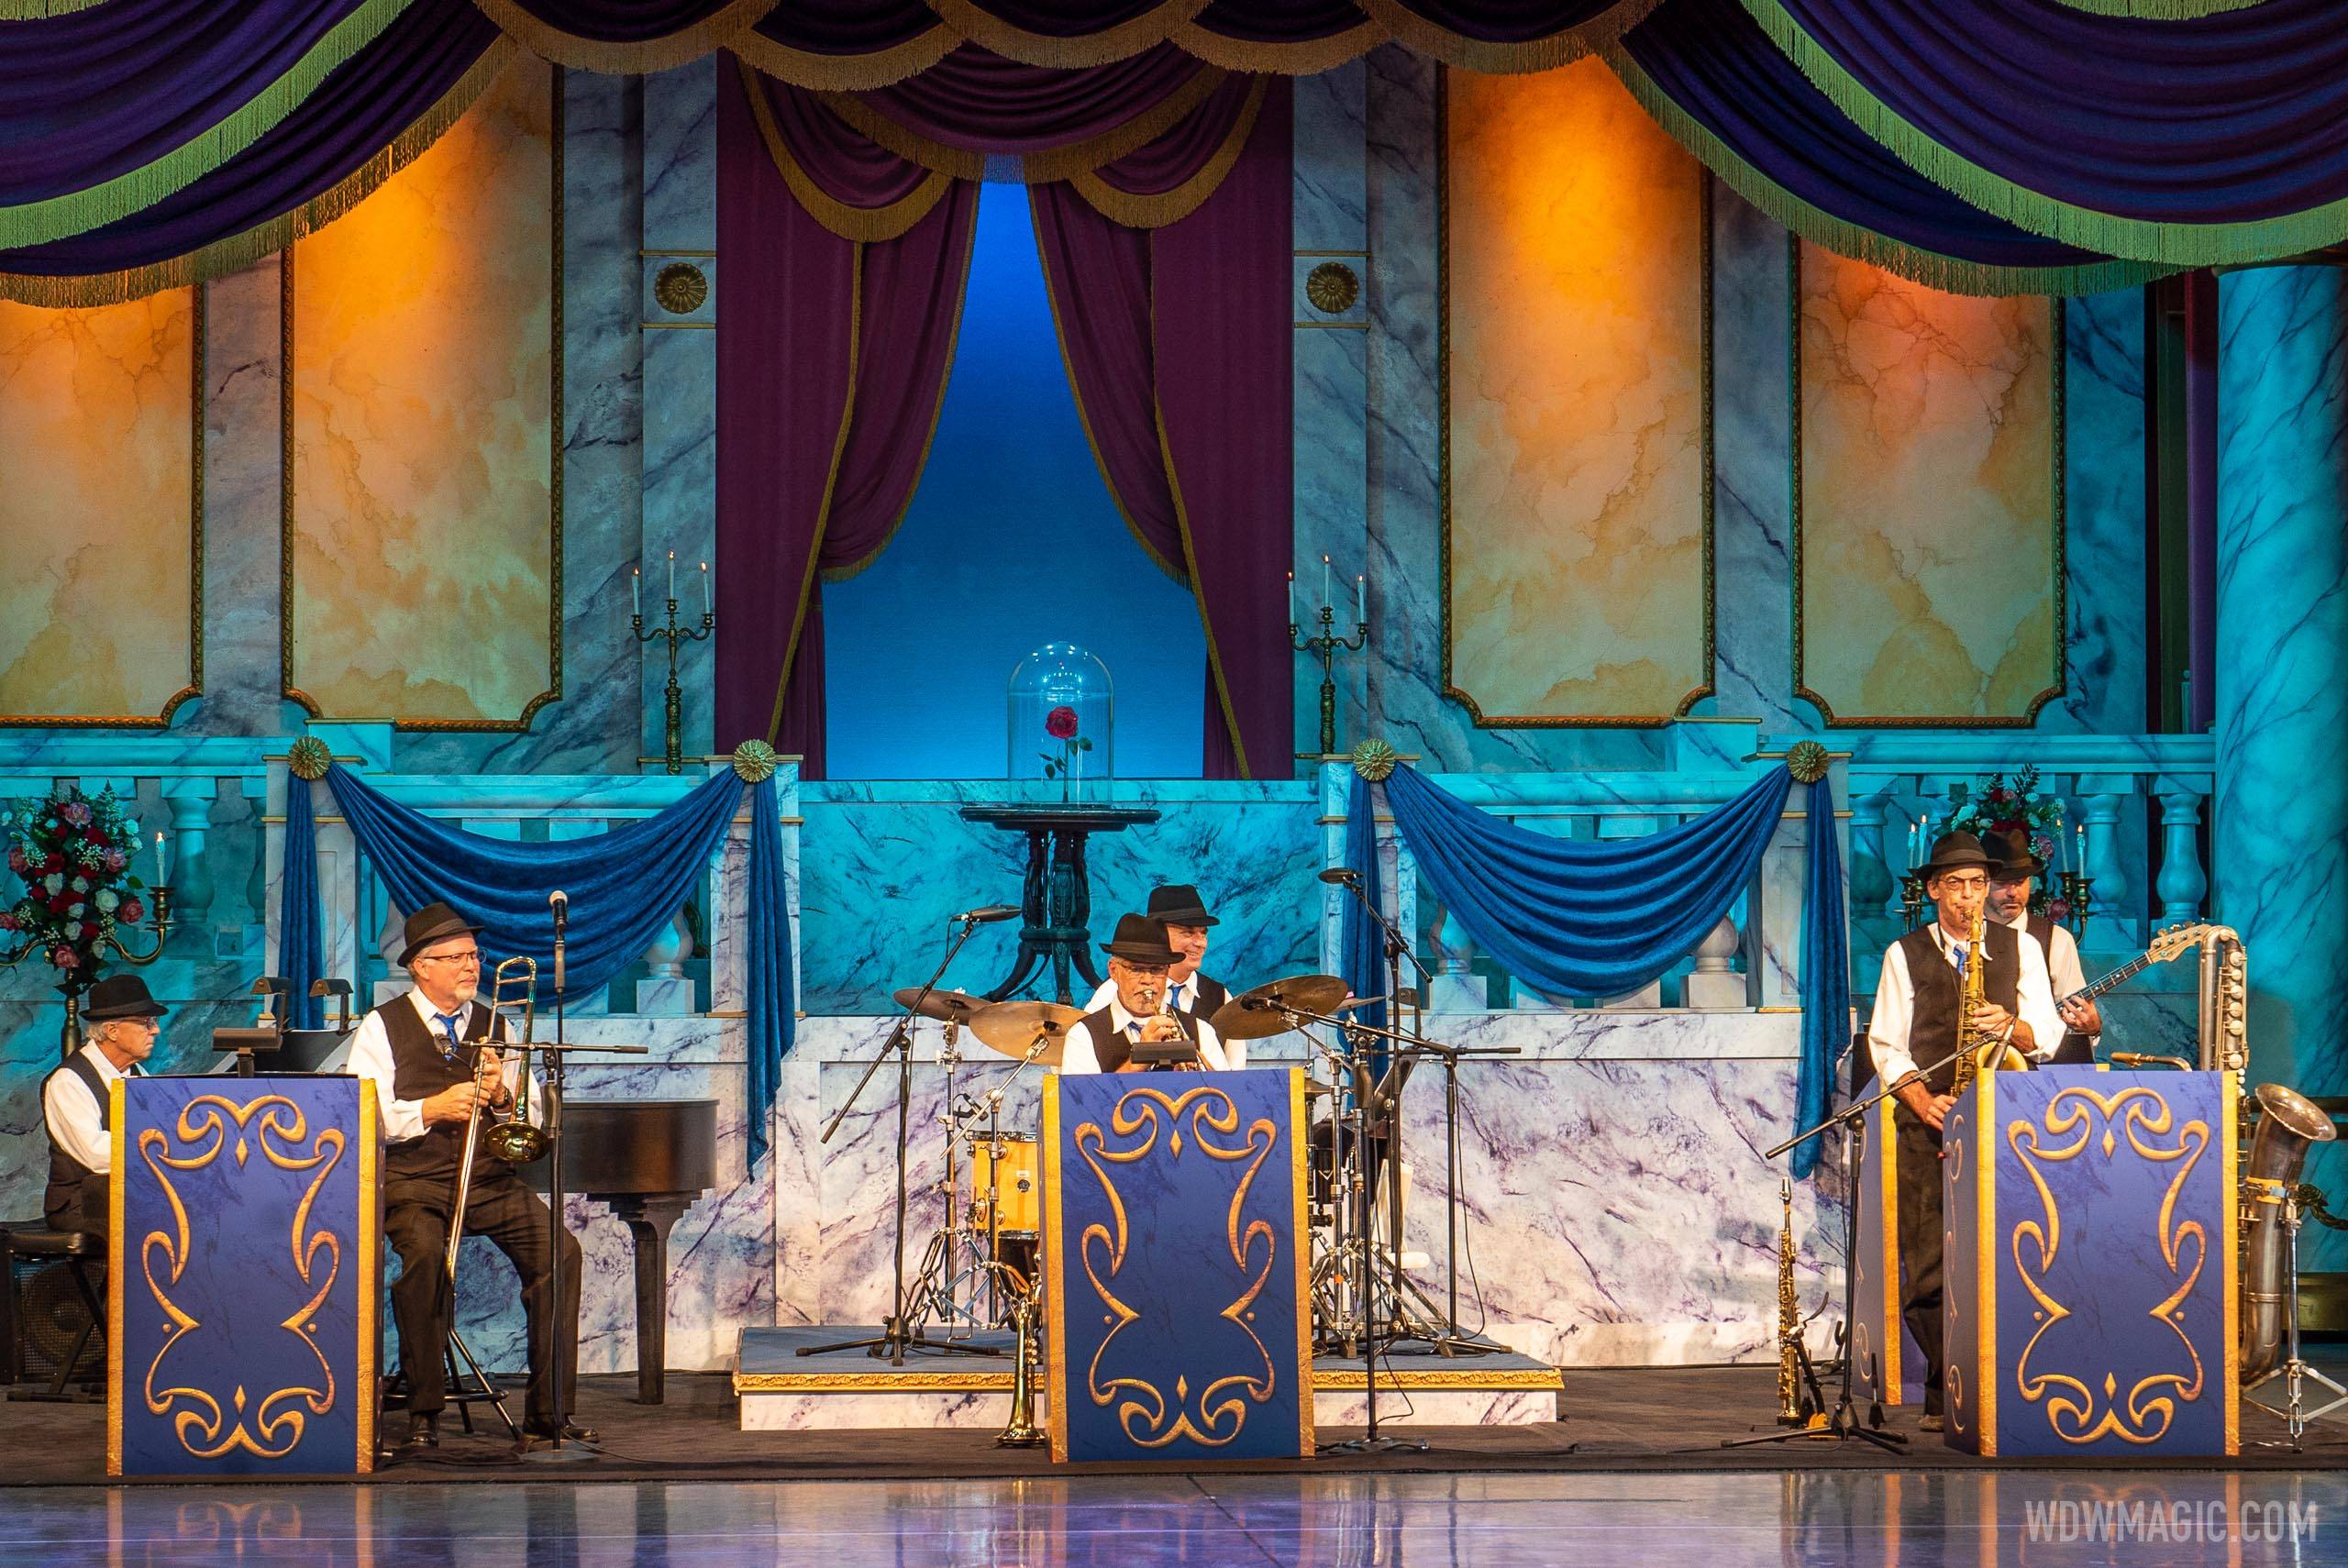 The Disney Society Orchestra and Friends to end in early October and no more performances at the Grand Floridan